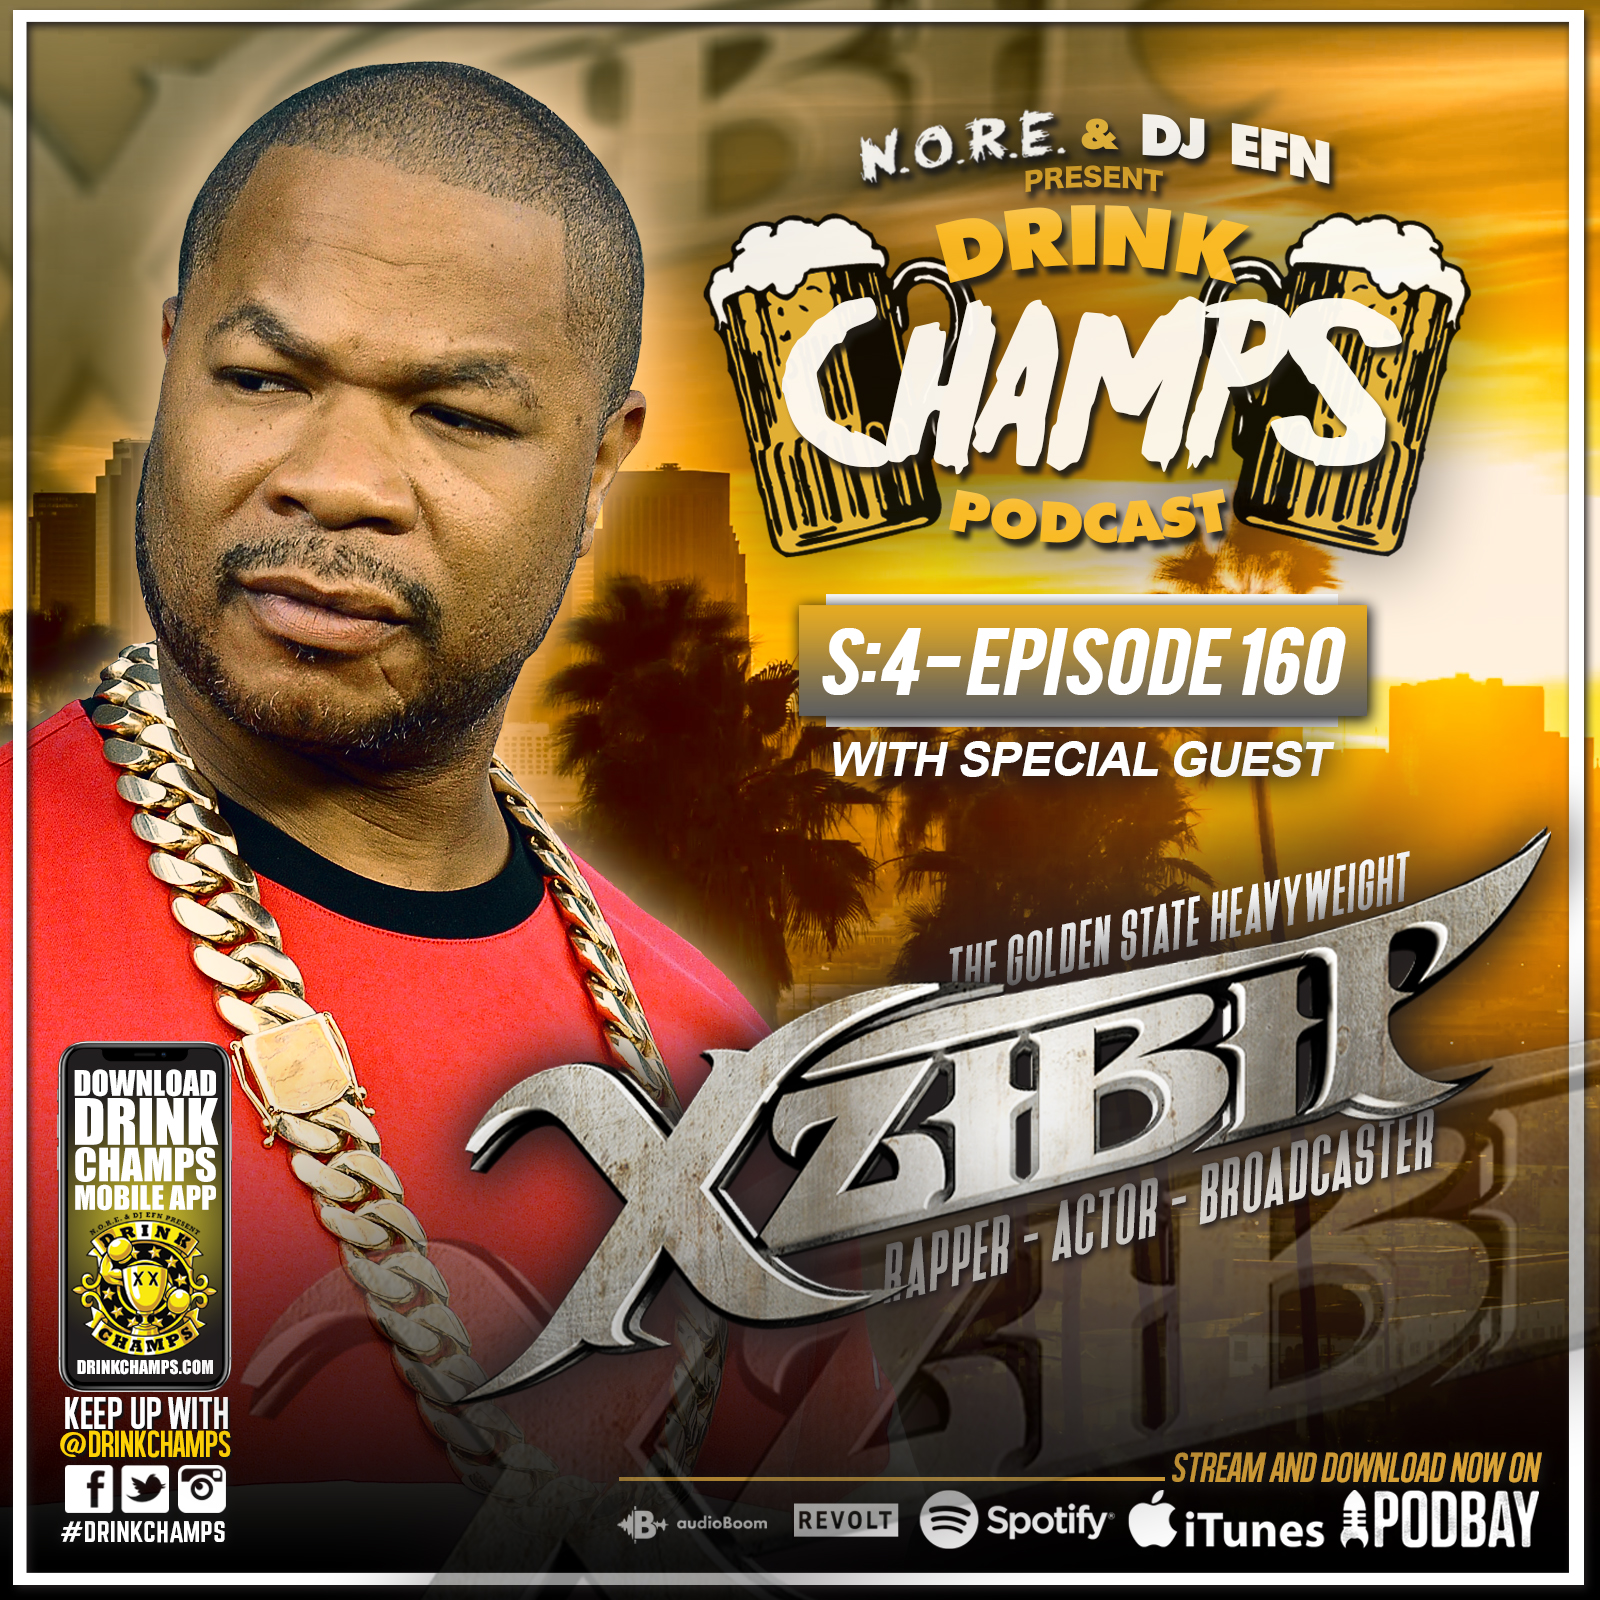 N.O.R.E & DJ EFN are the Drink Champs. 